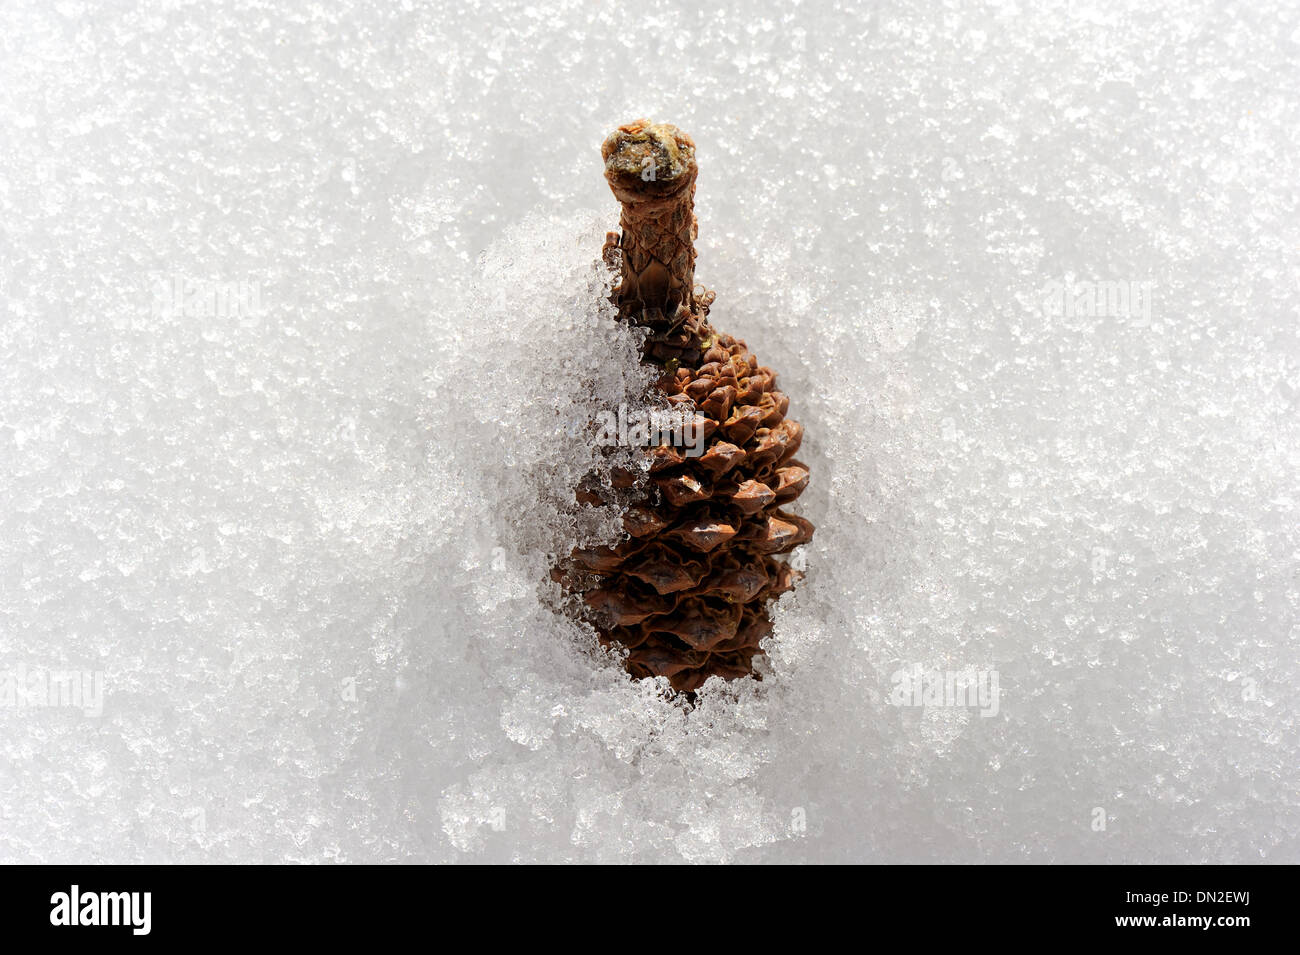 Small cone covered in snow. Stock Photo